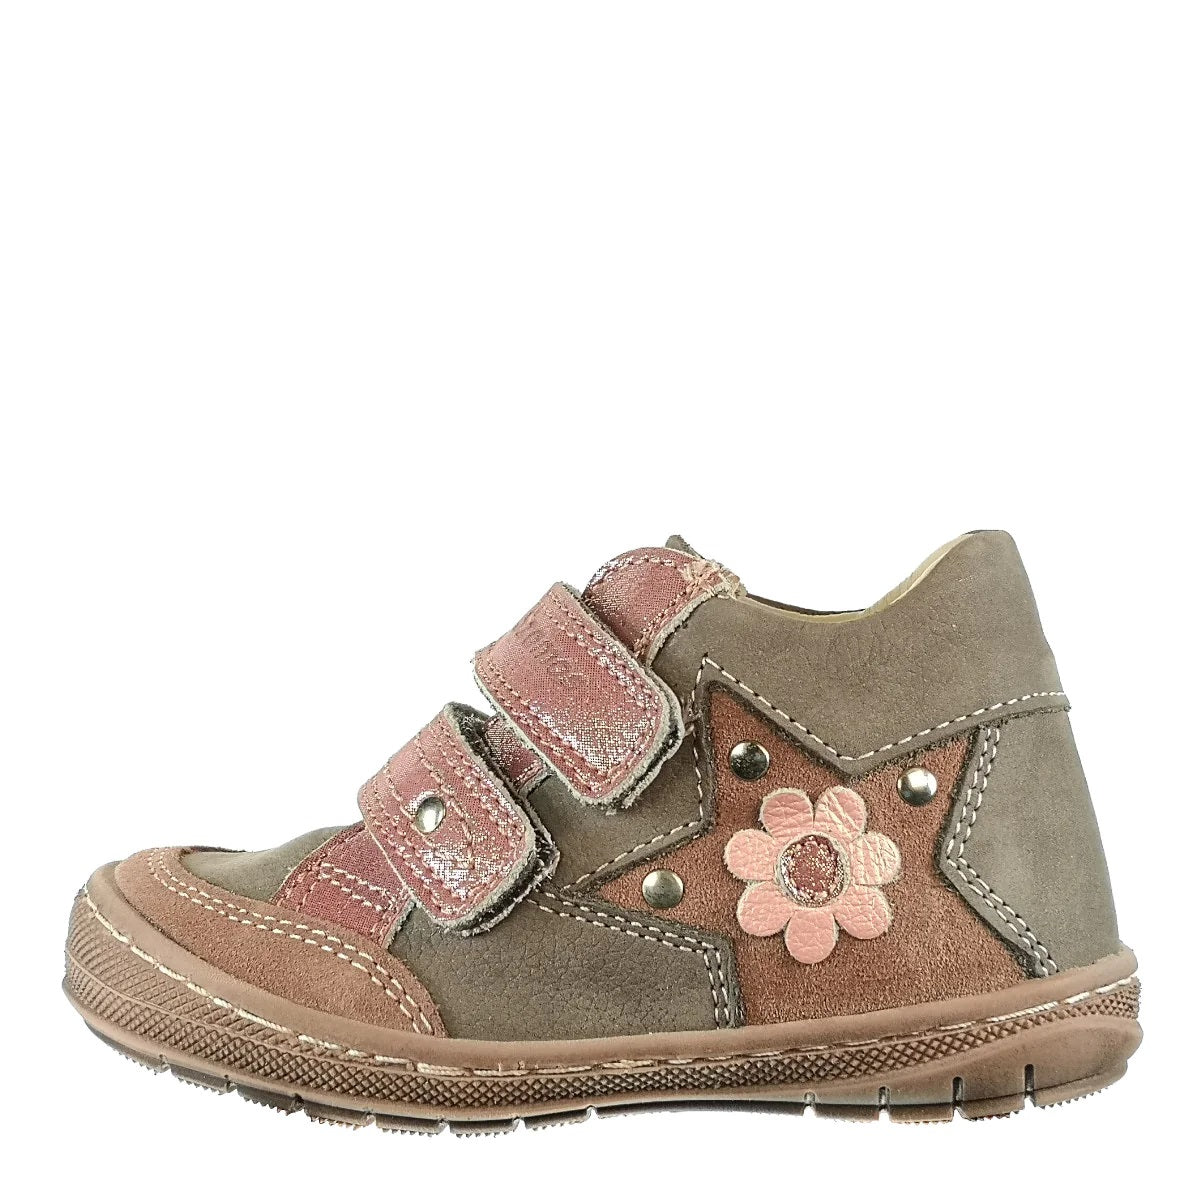 Premium quality shoes made from 100% genuine leather lining and upper, grey with pink sole and velcro straps flower in star decor. This Szamos Kids product meets the highest expectations of healthy and comfortable kids shoes. The exceptional comfort these shoes provide assure the well-being and happiness of your child.